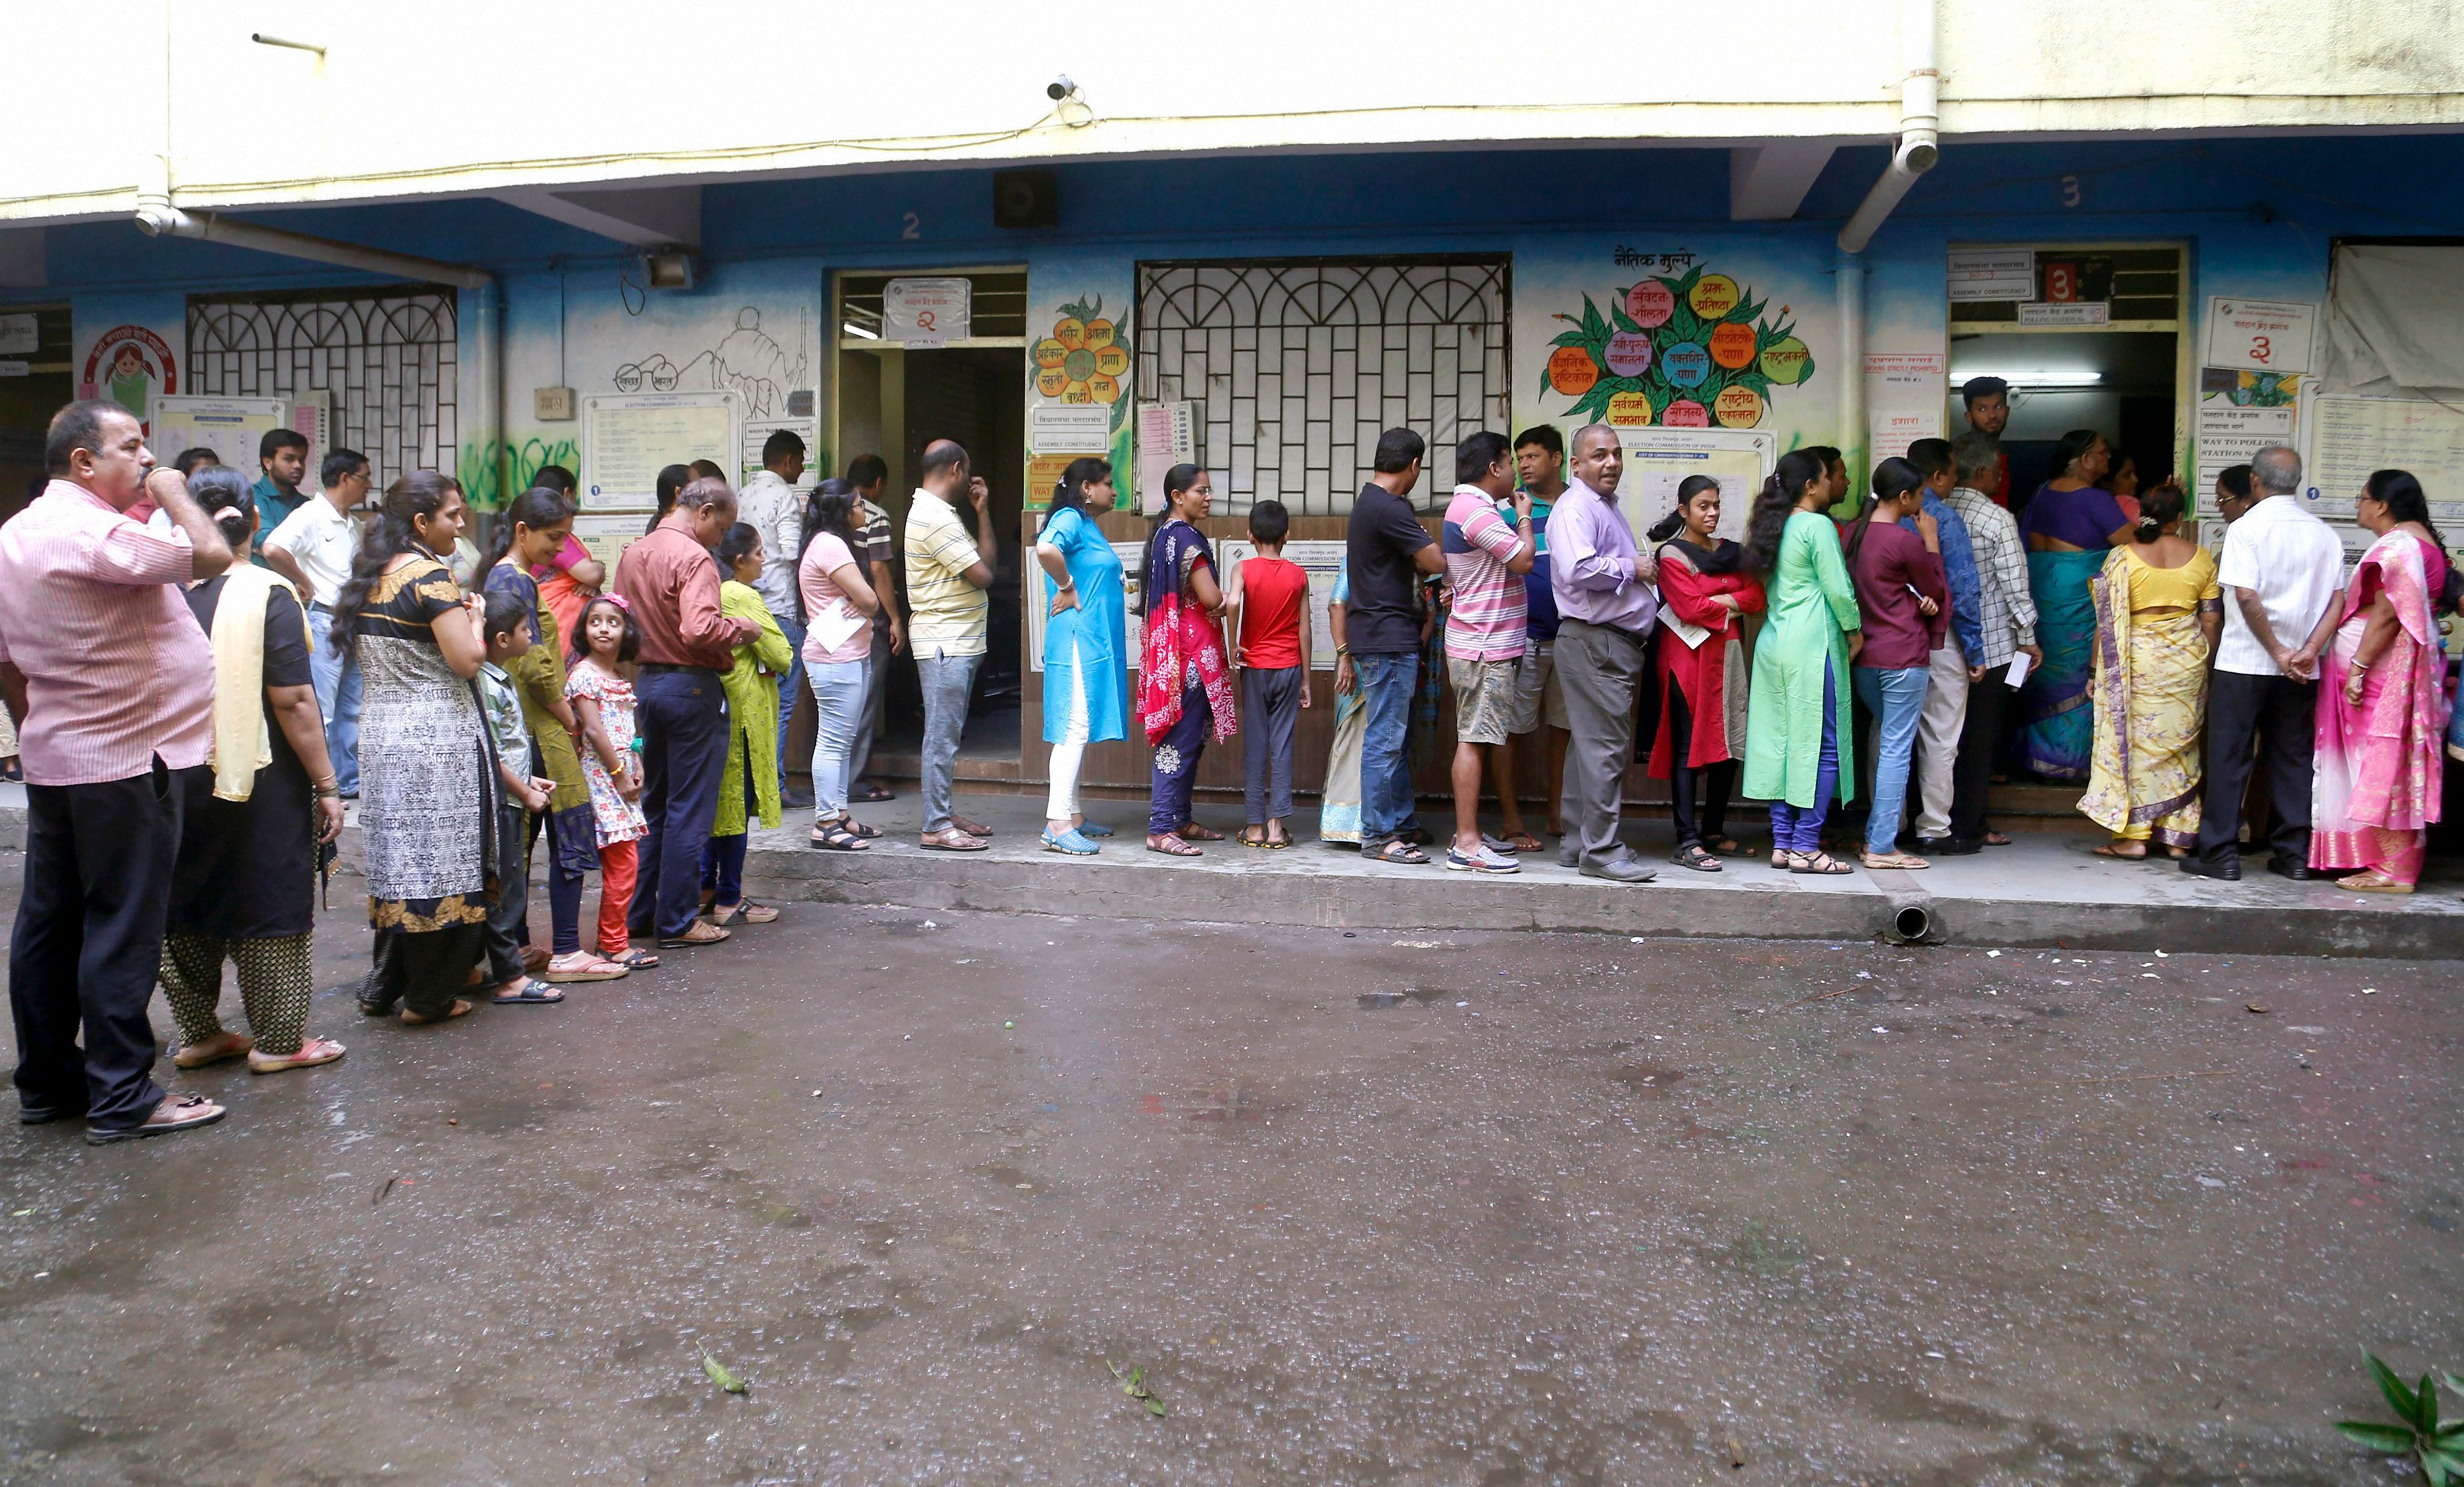  Voters stand in a queue displaying their voter card outside a polling station during Maharashtra Assembly elections, in Thane. (PTI Photo)